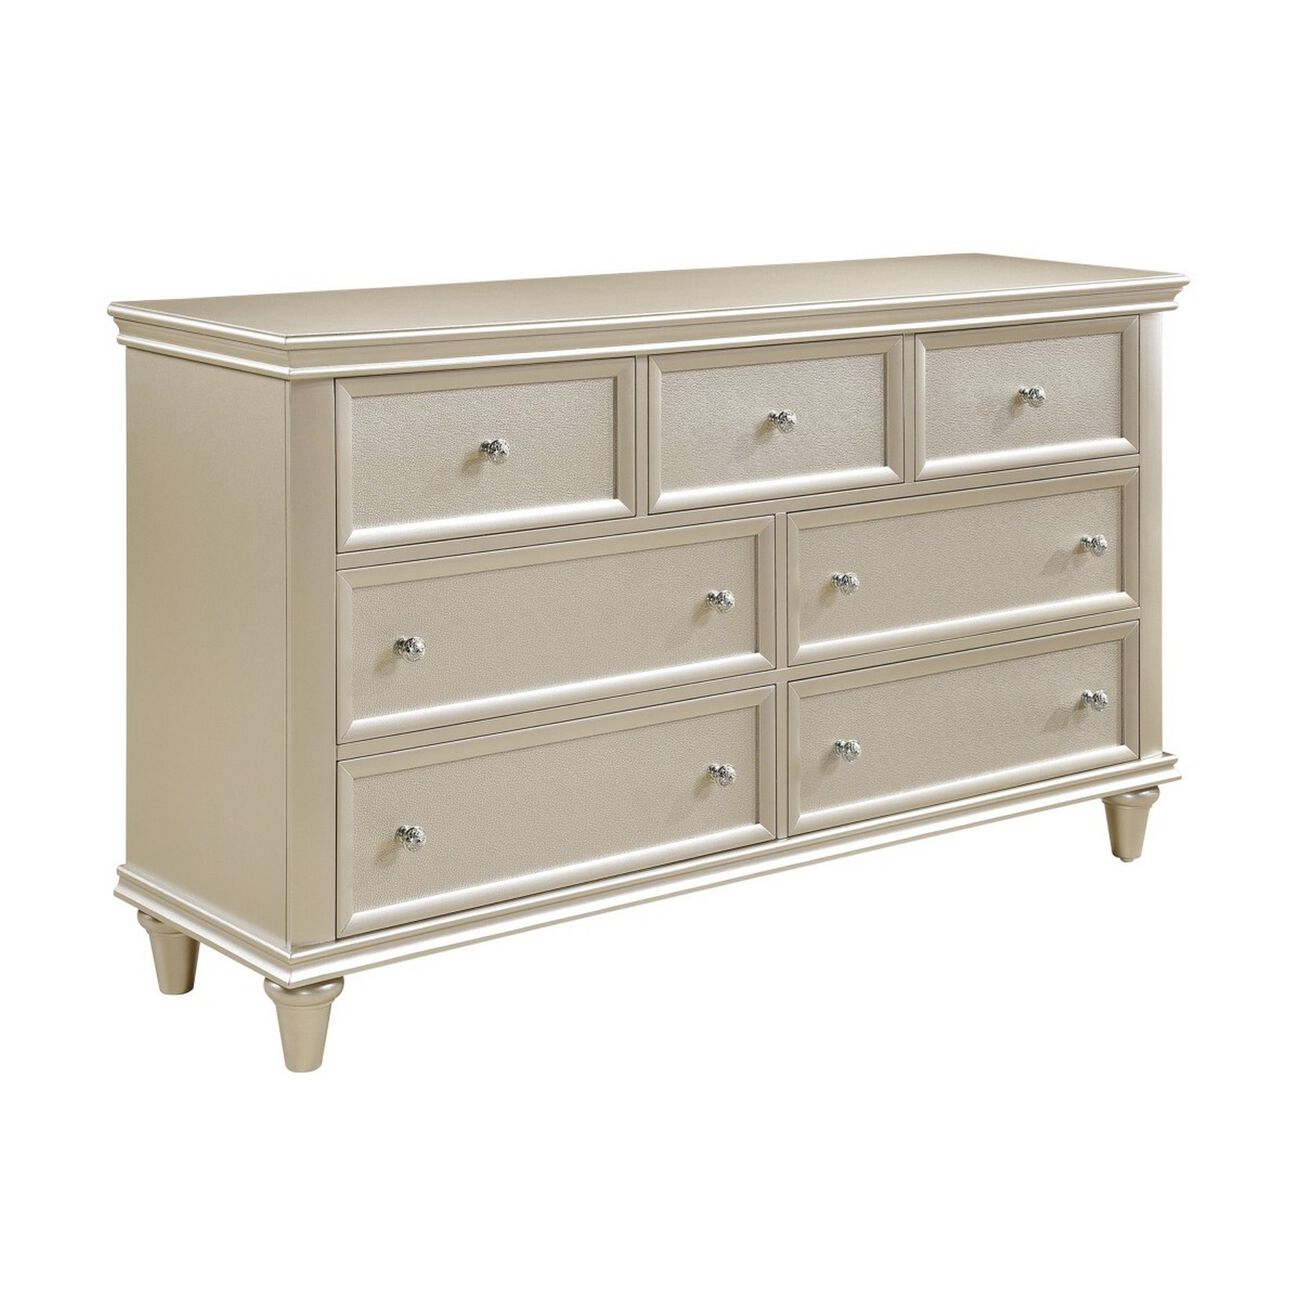 7 Drawer Wooden Dresser with Faux Crystal Knobs, Champagne Silver